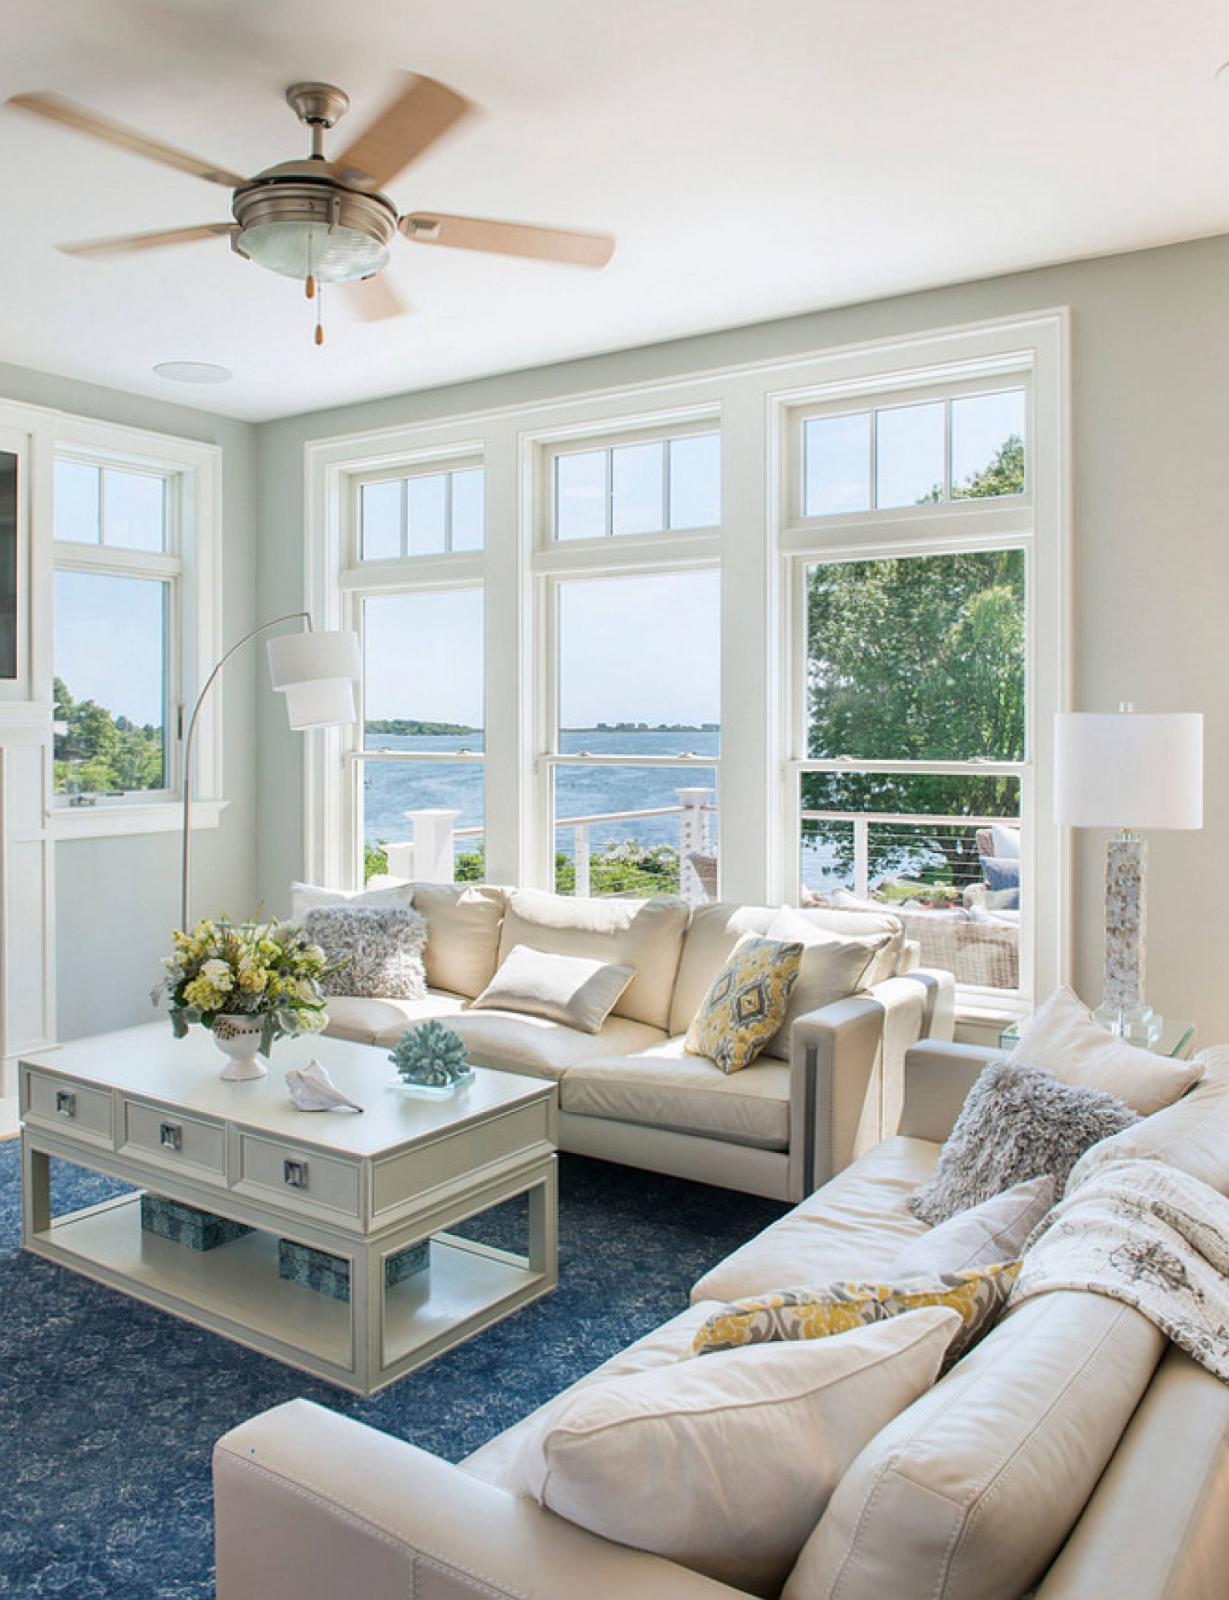 Effortless Beach Cottage Style: Cozy, Charming Mix of Aqua and ...